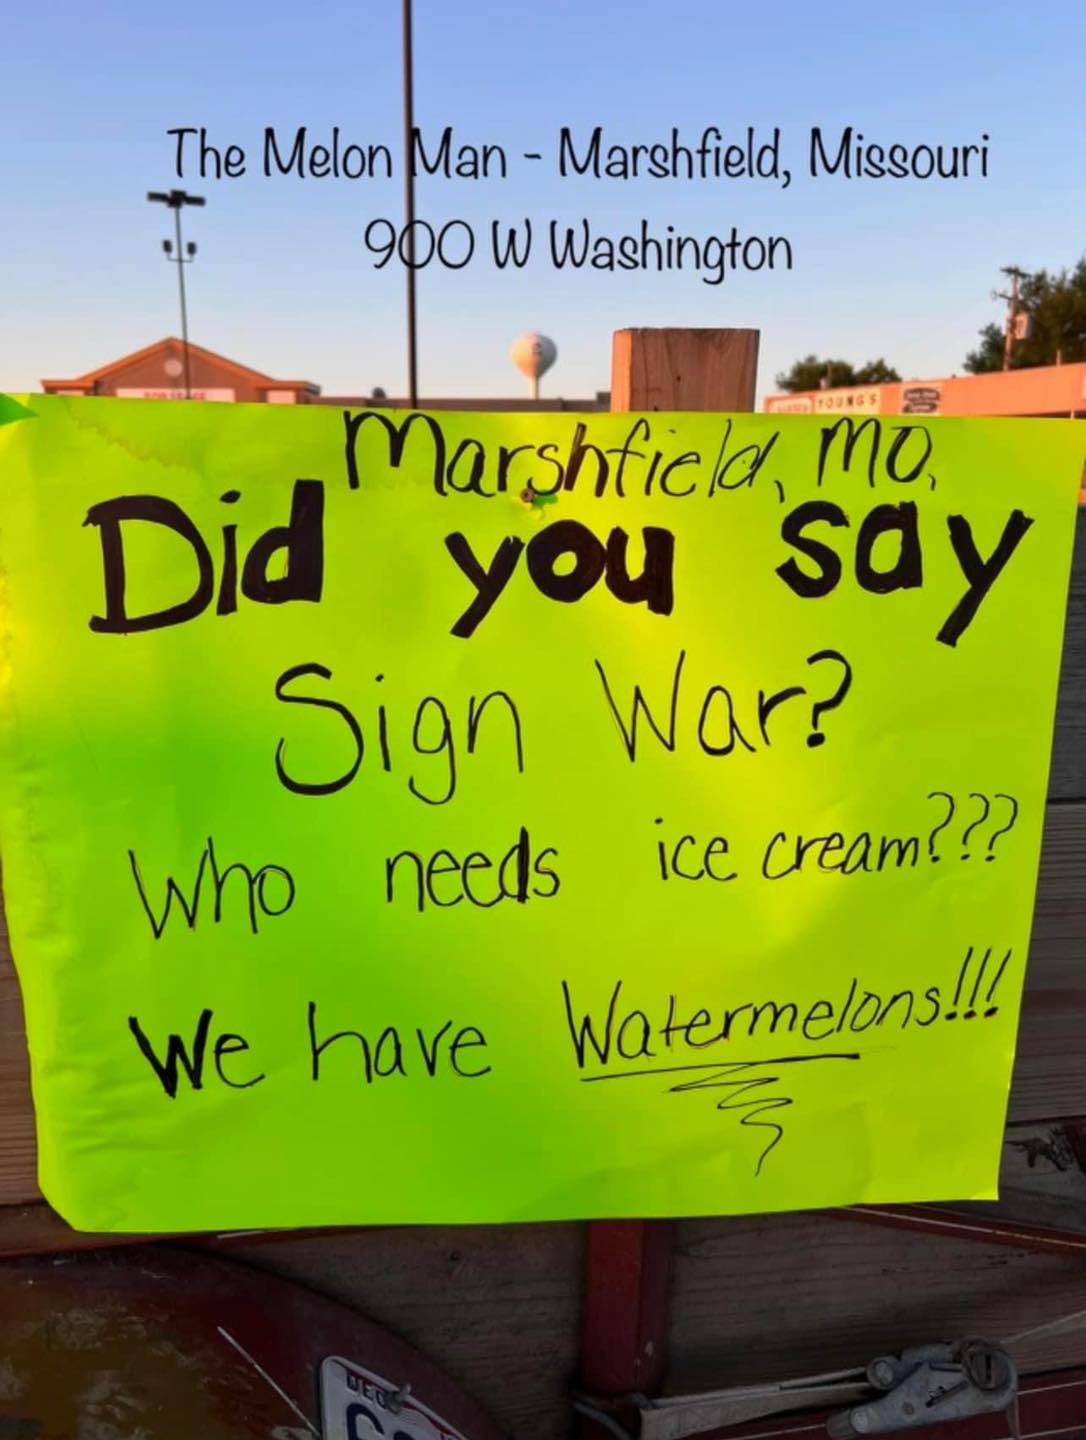 fruit market's sign that says: "sign war? who needs icre cream?? we have watermelons!!"